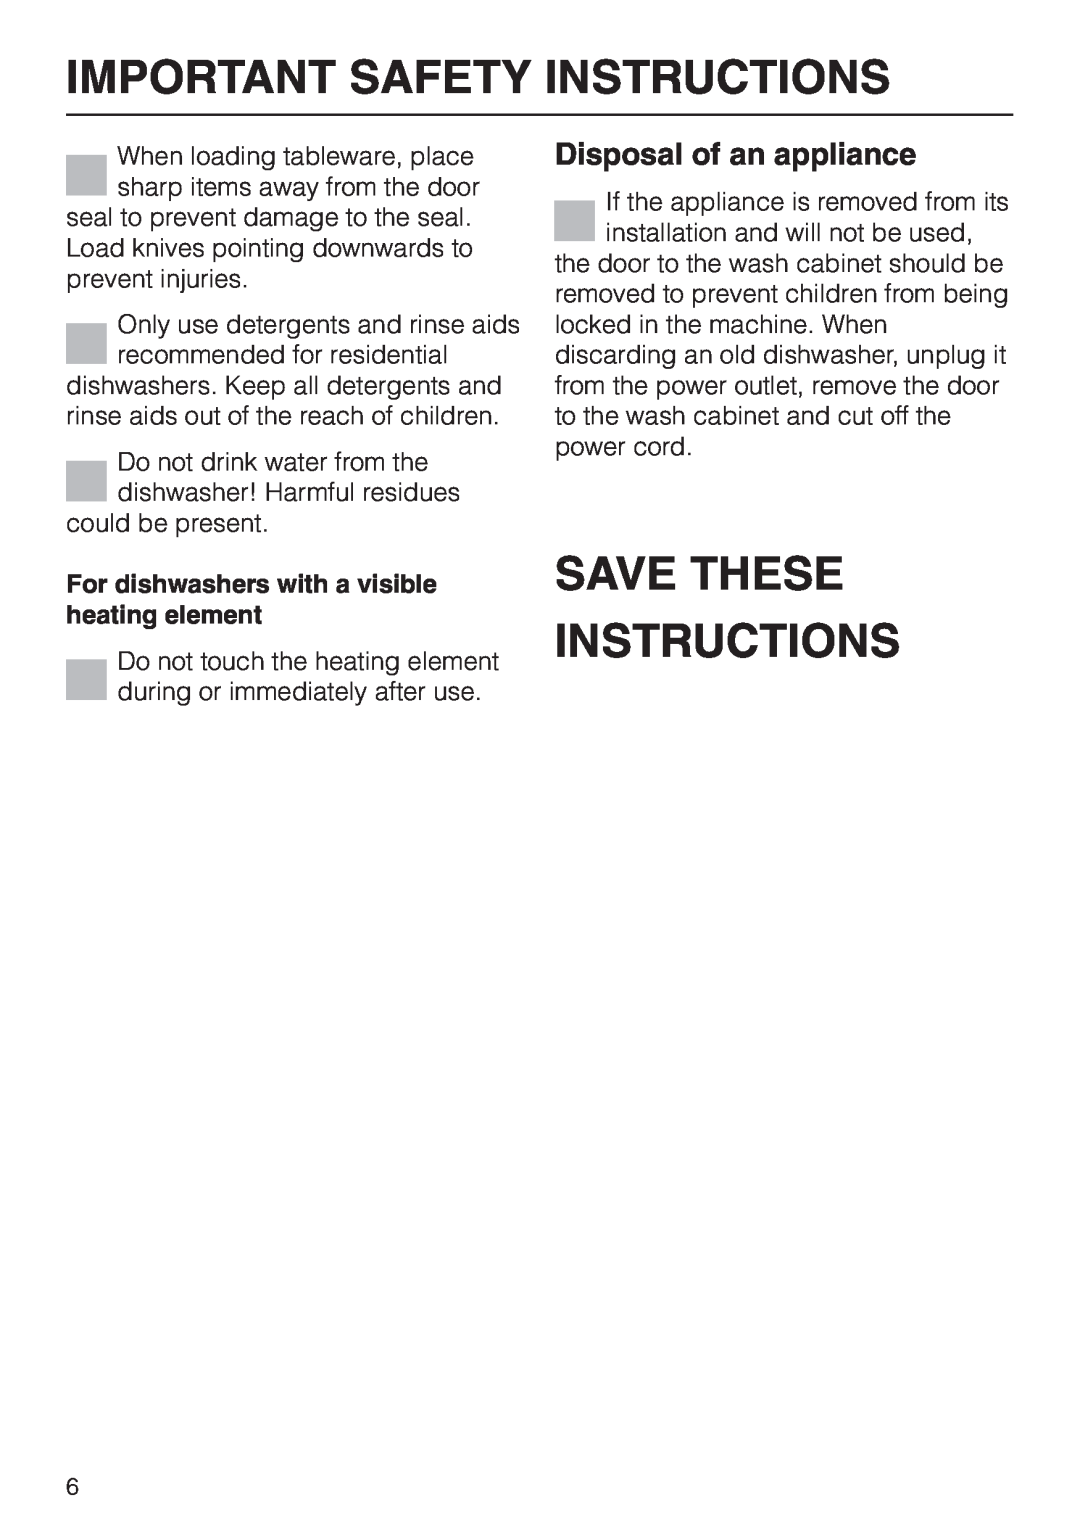 Miele G 663 Plus, G 863 Plus, 05-724-281 Save These Instructions, Disposal of an appliance, Important Safety Instructions 